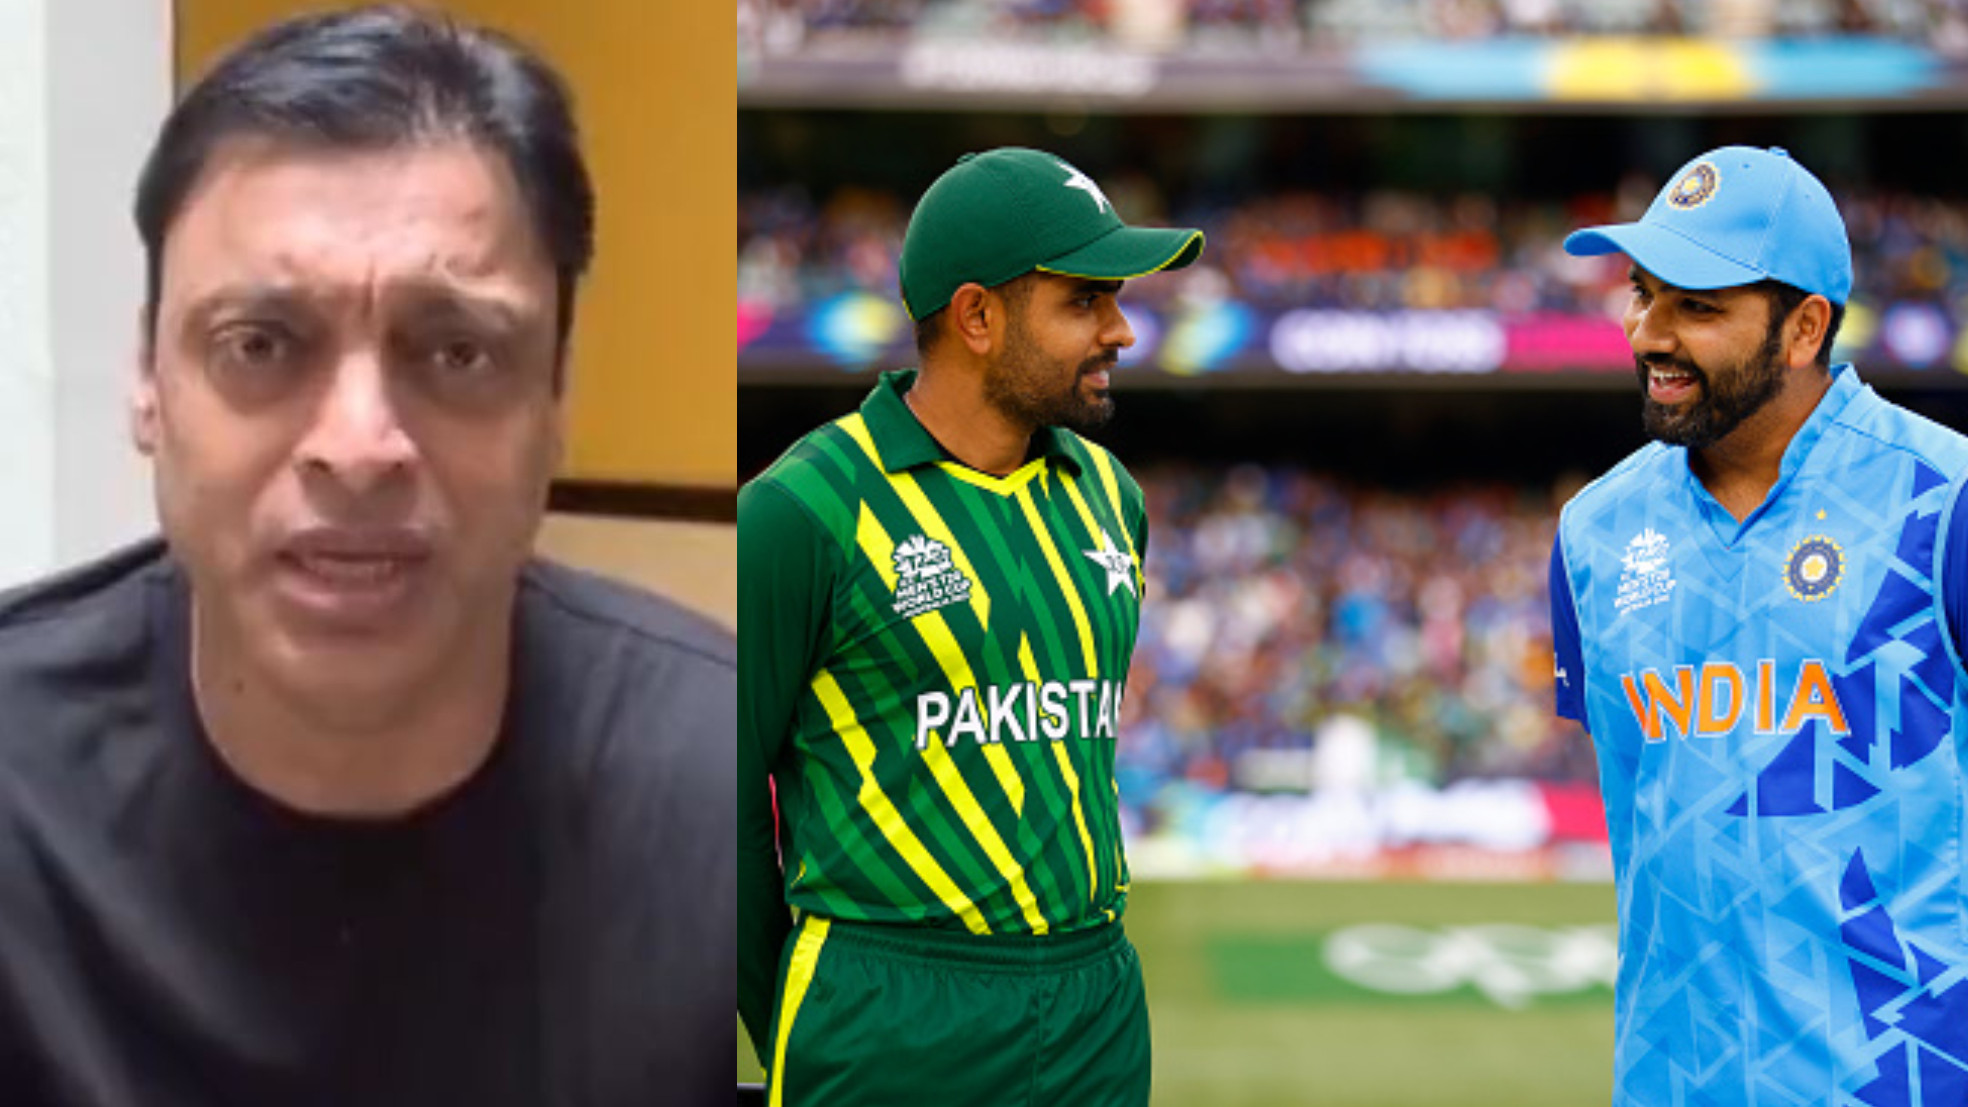 T20 World Cup 2022: “Pakistan needs to win their semi-final”- Shoaib Akhtar wants to see India-Pakistan in the final